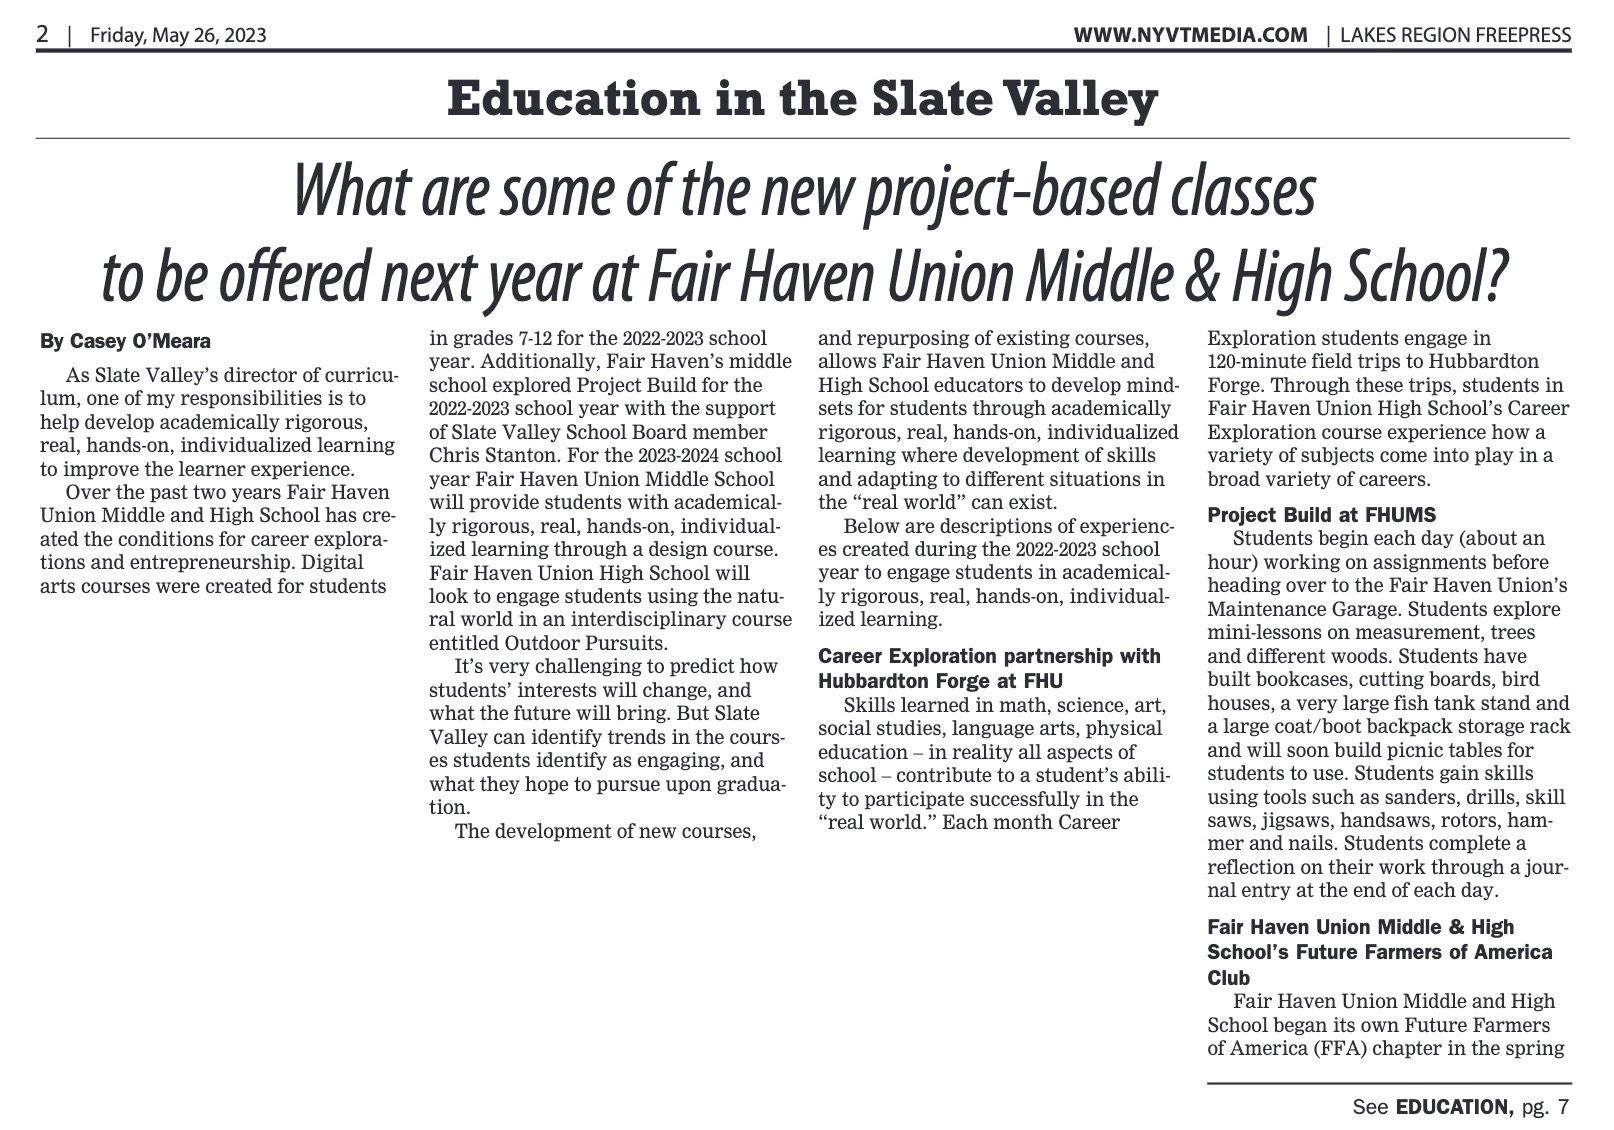 Education in the Slate Valley Article